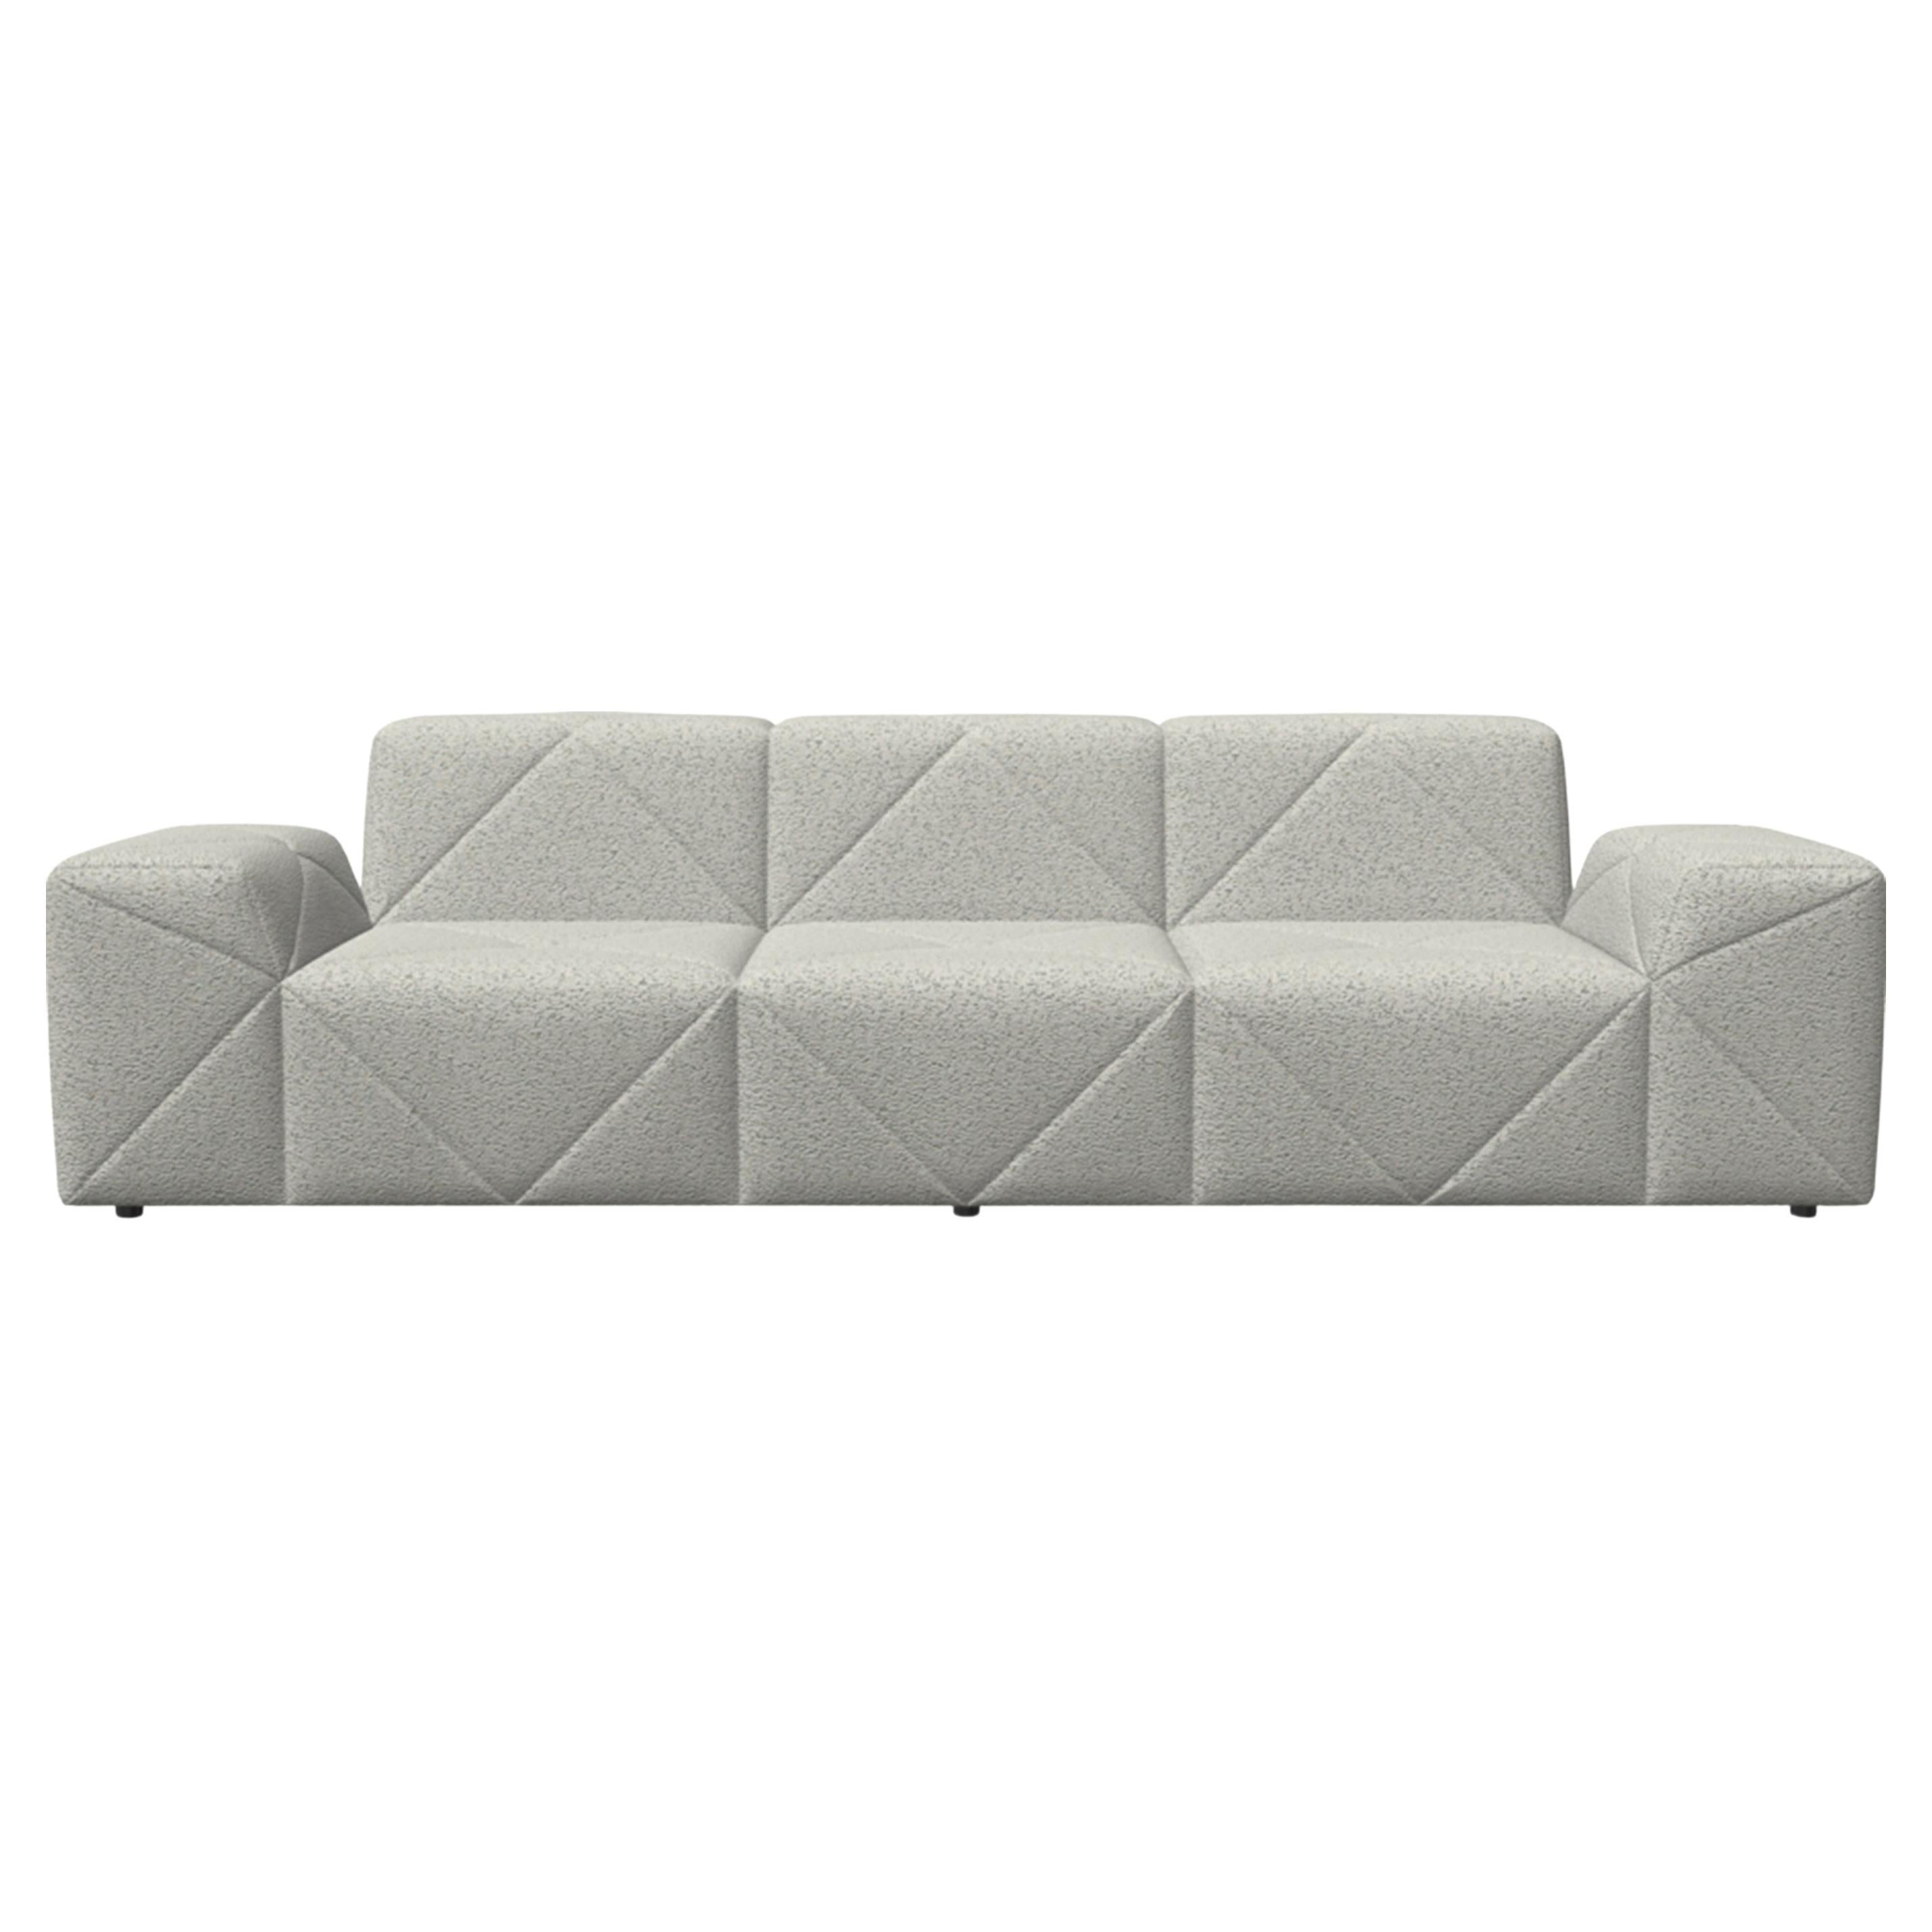 Moooi BFF Triple Seater TE01 Low Sofa in Dodo Pavone Jacquard White Upholstery For Sale